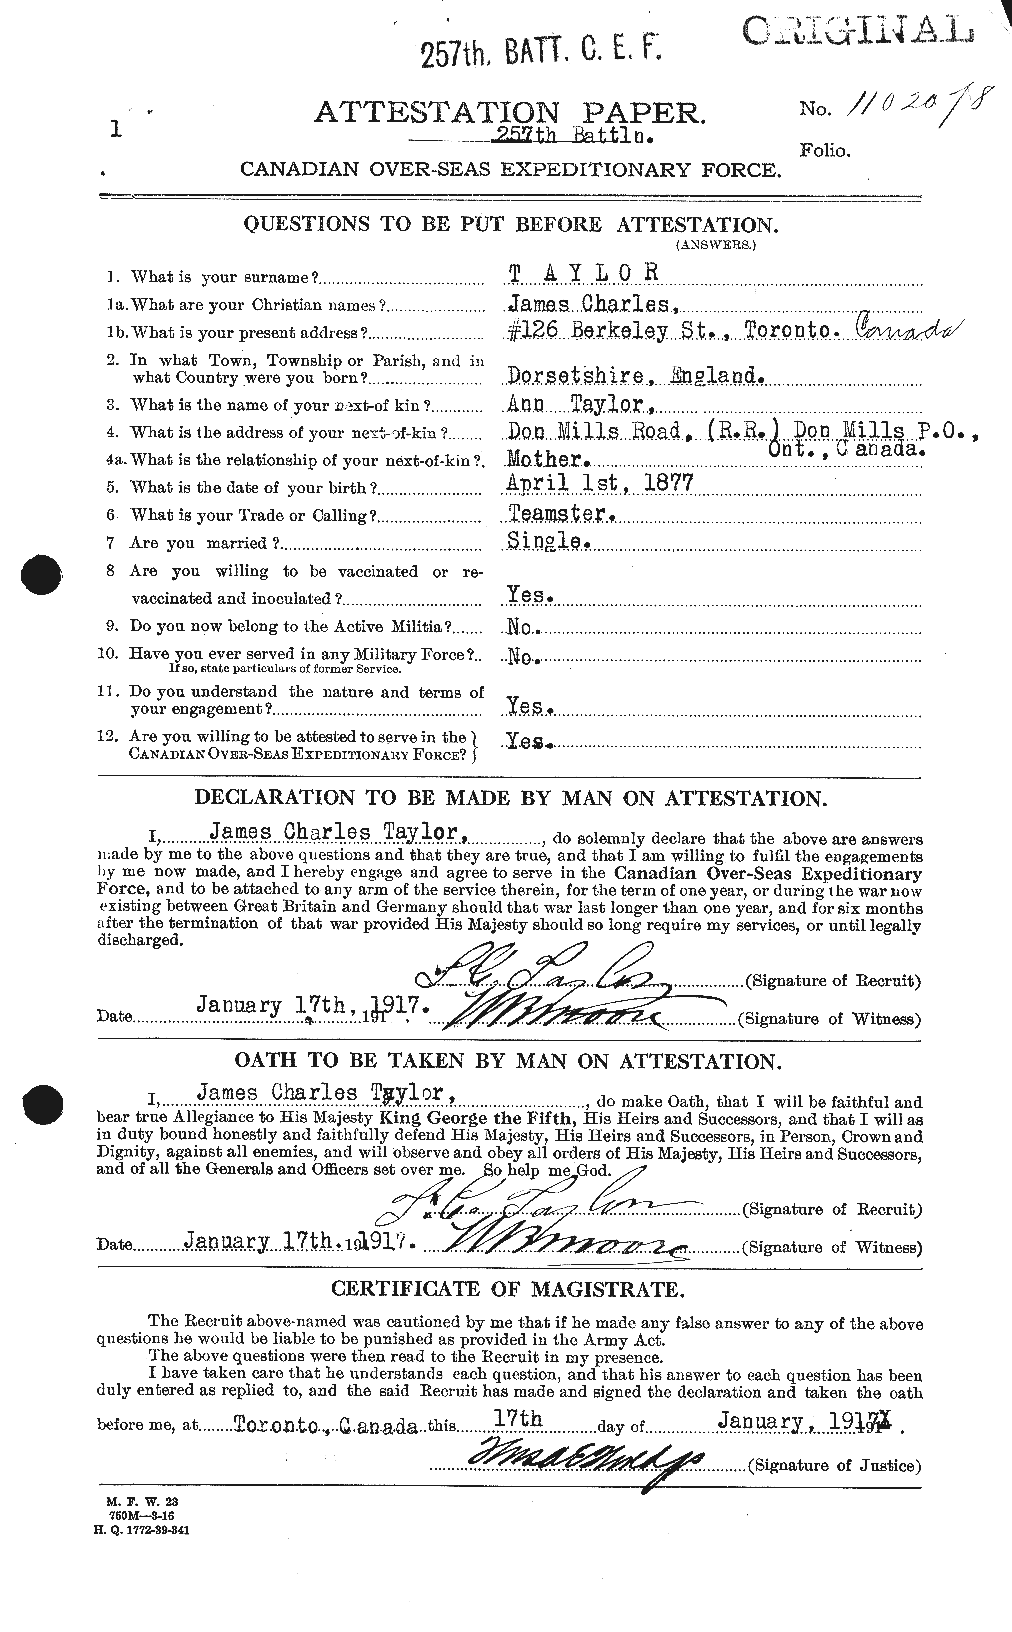 Personnel Records of the First World War - CEF 626909a